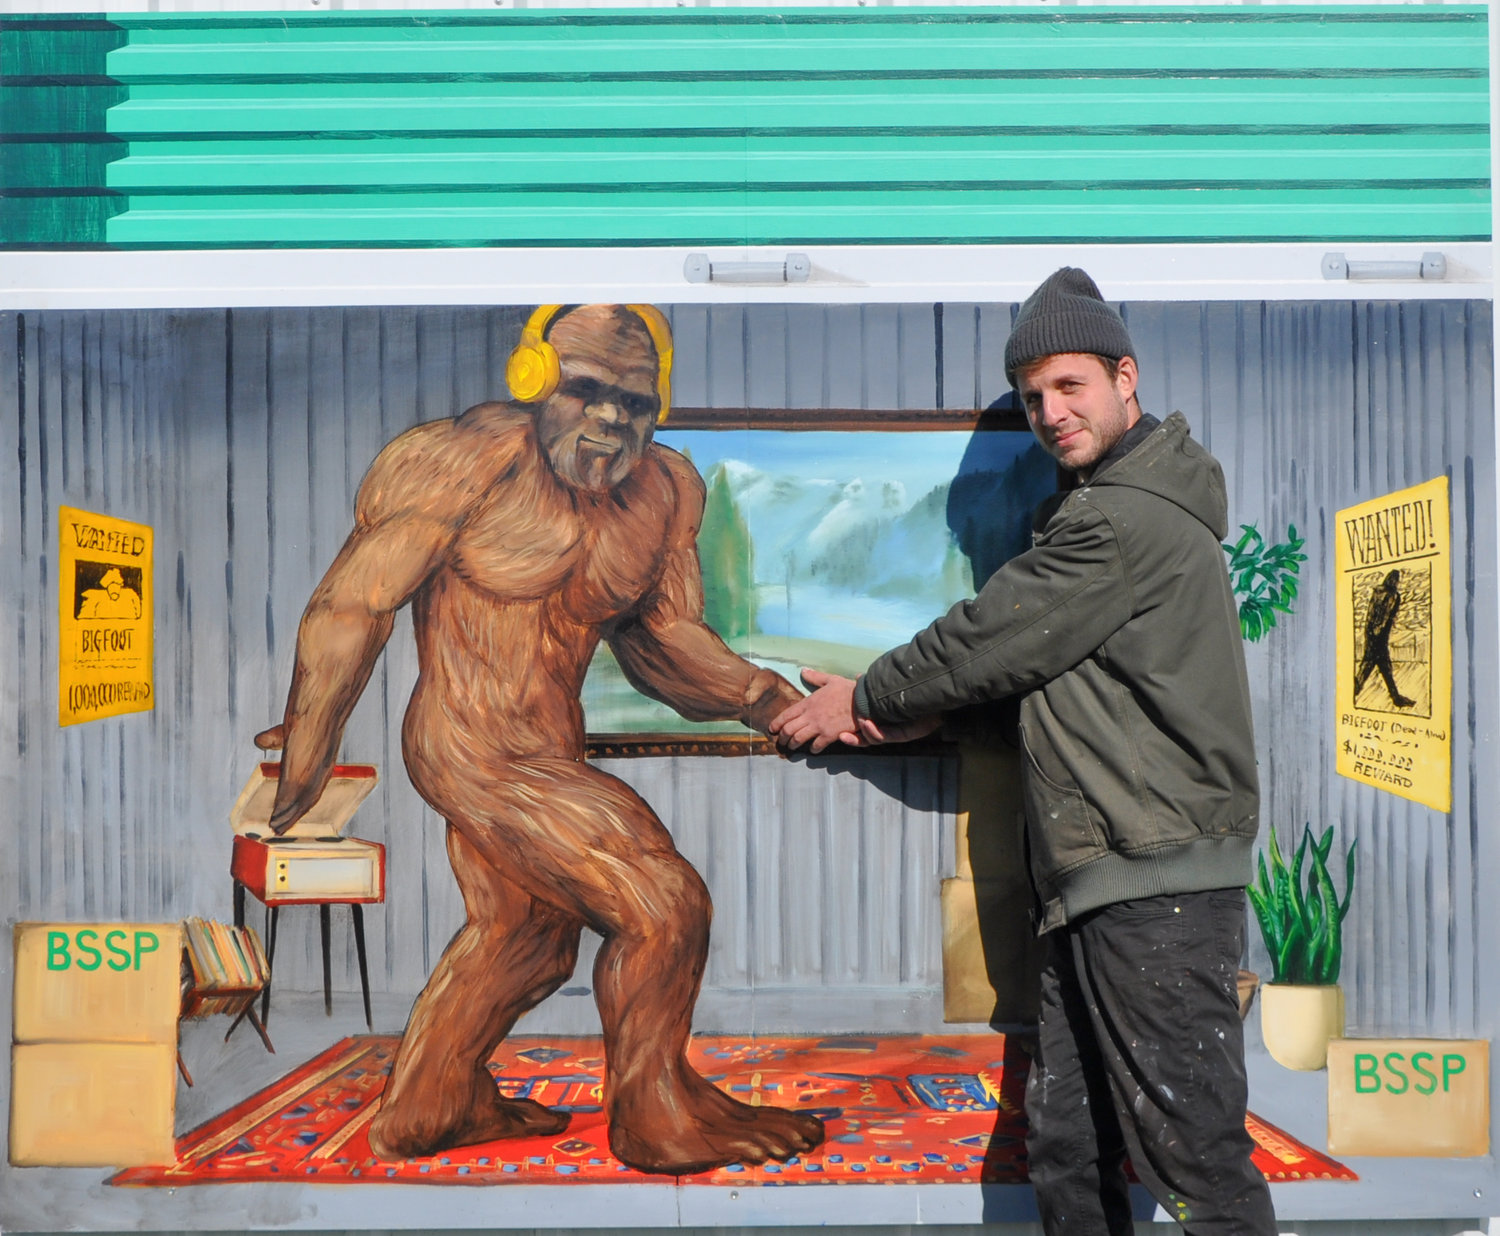 Muralist David Barnett congratulates Bigfoot on eluding capture at the Bethel Storage Park on Rt 17B. Check it out, but keep your eyes on the road!